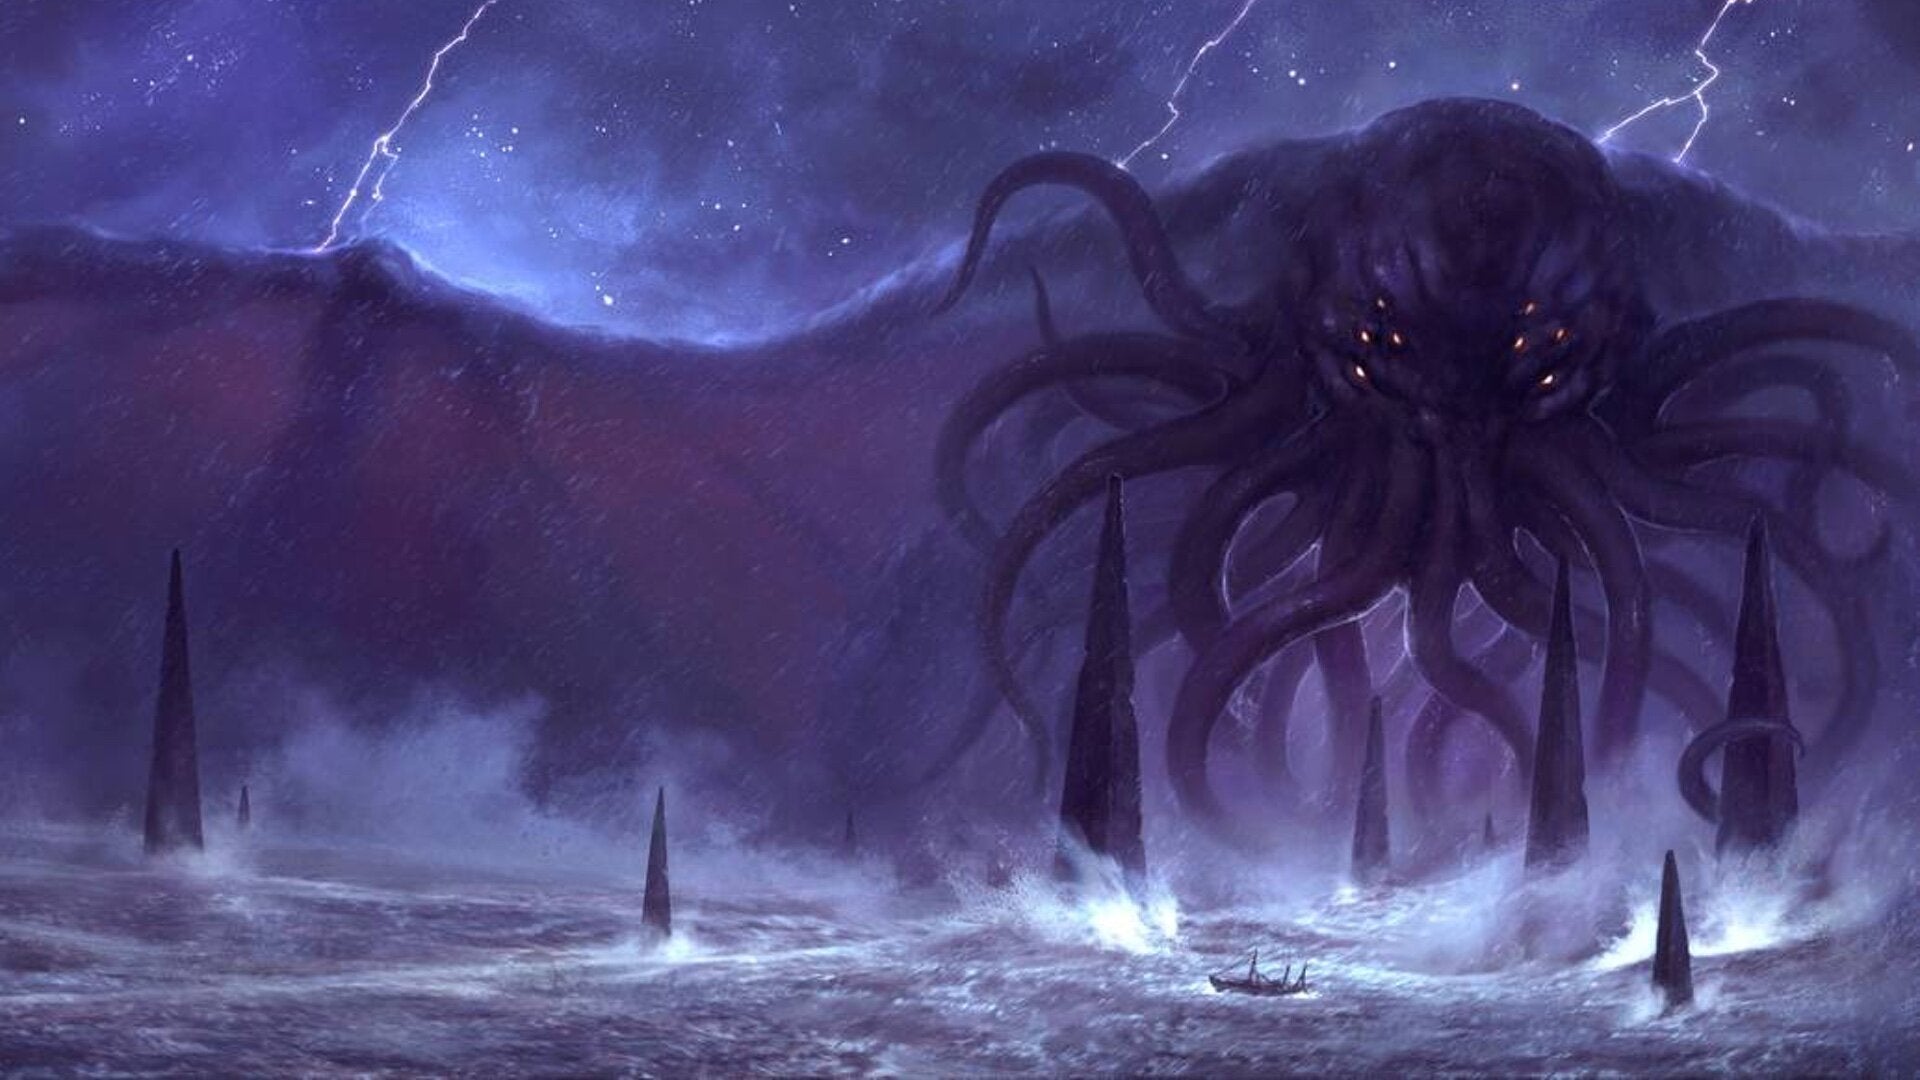 Call of Cthulhu, a horror tabletop RPG that draws from the Lovecraftian mythos.